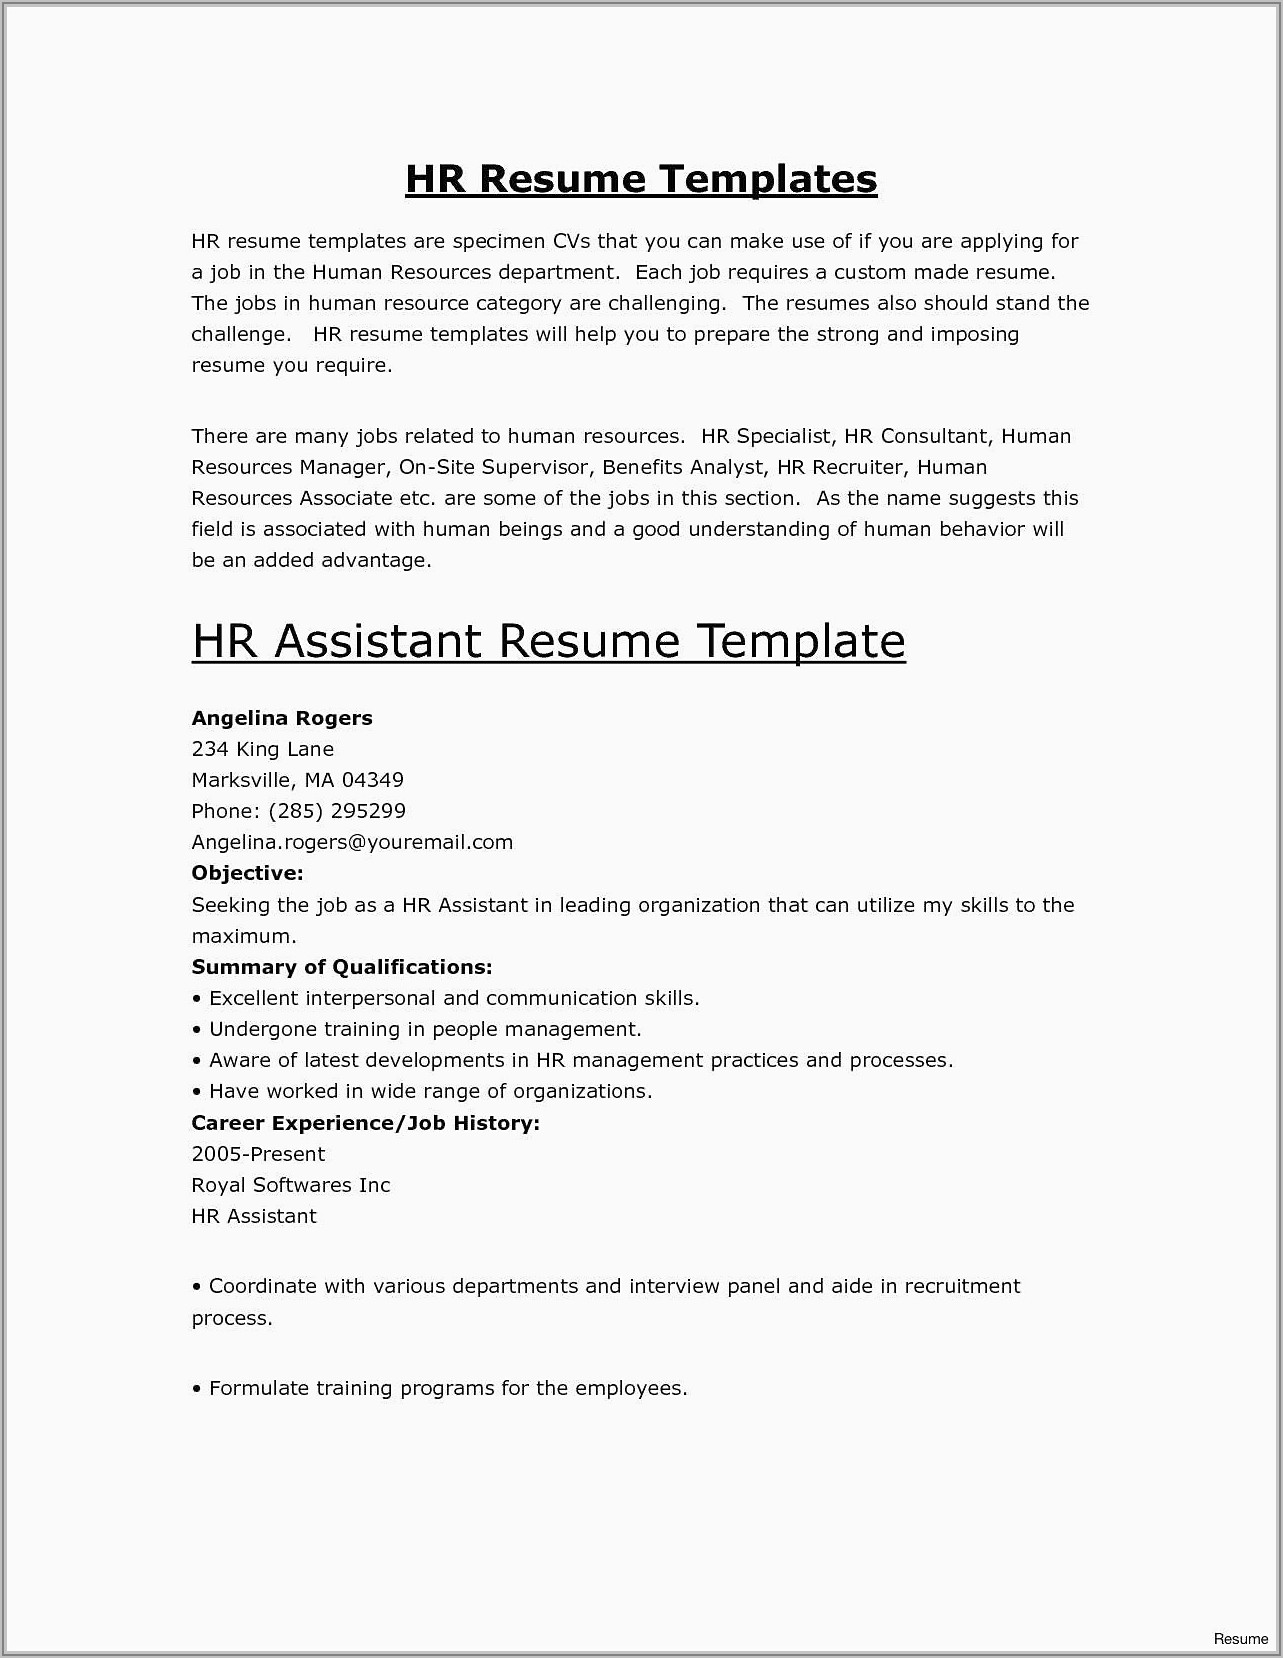 Resume Objective Examples For Nursing Assistant